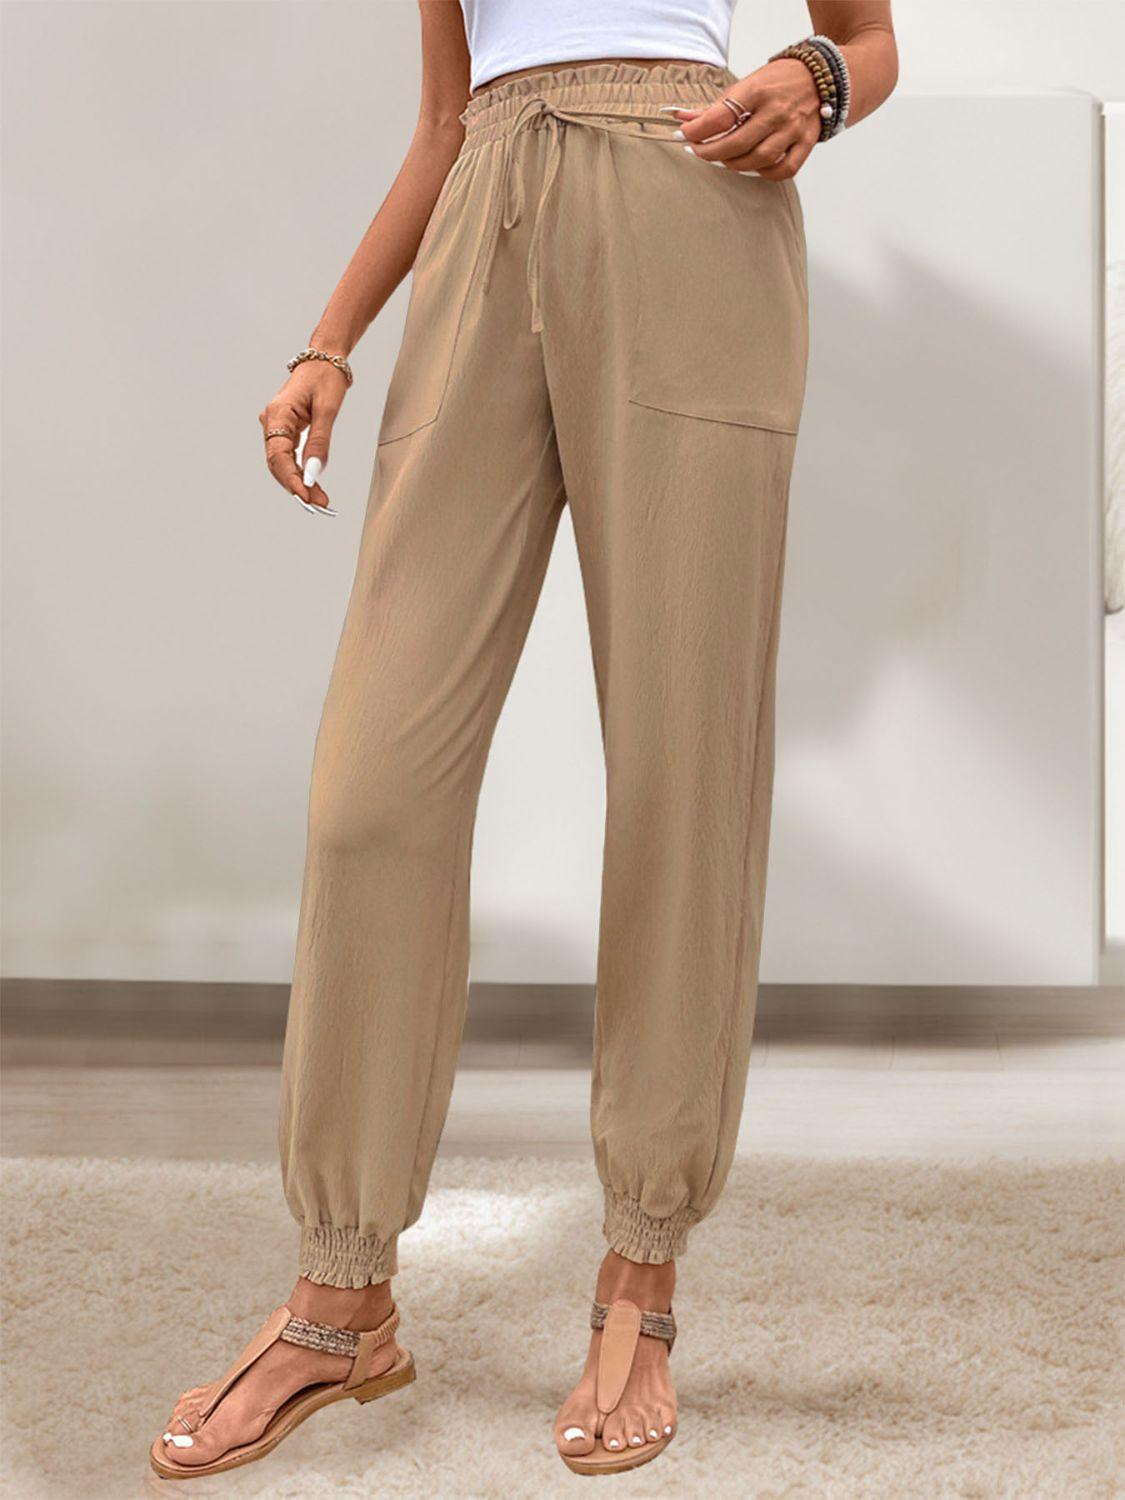 Women's Pants Tied Elastic Waist Pants with Pockets